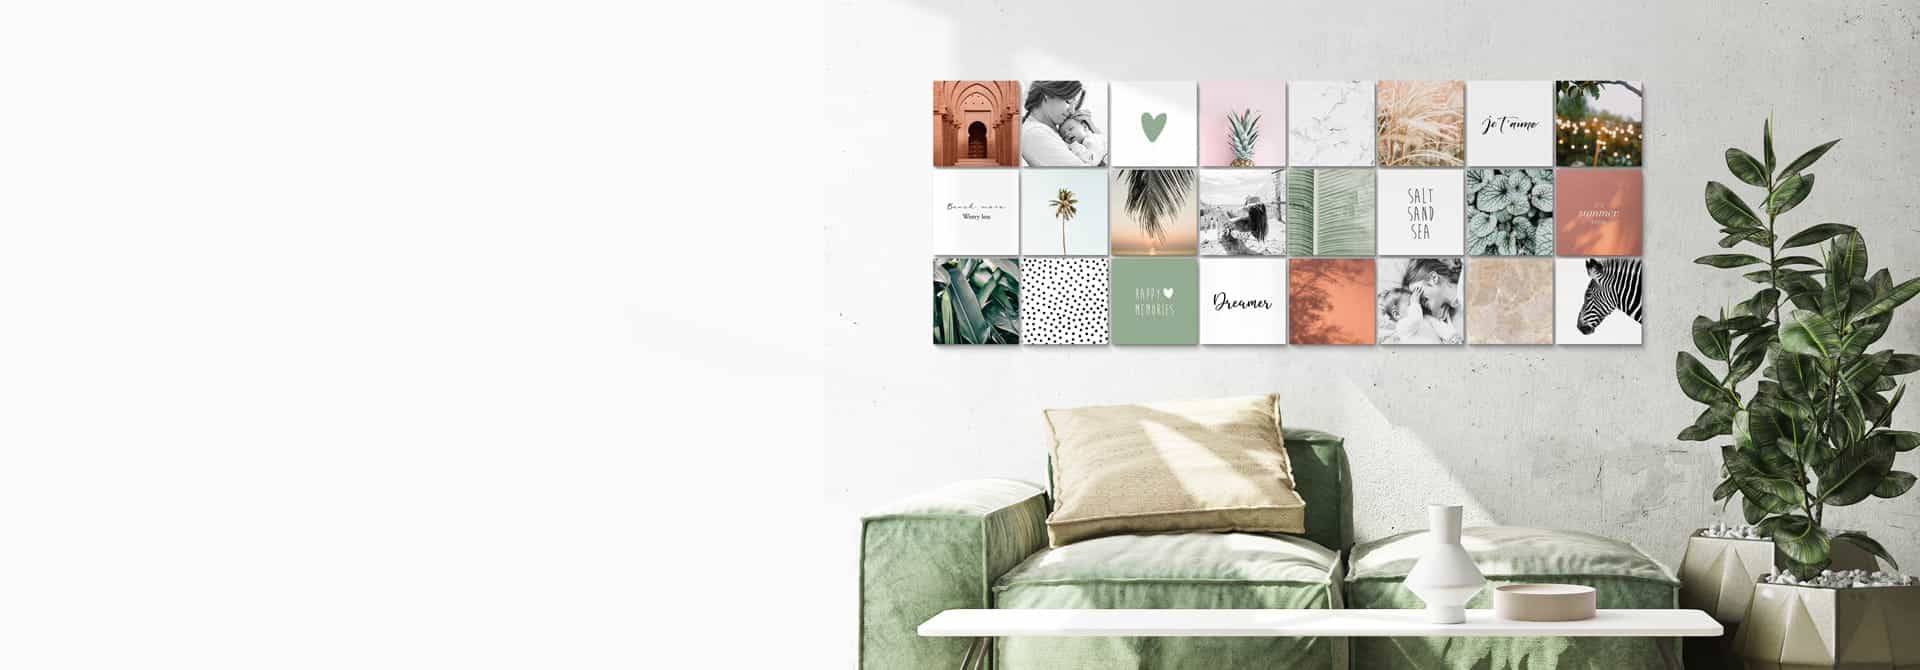 CusttomShapes. Design your own personal photo wall!